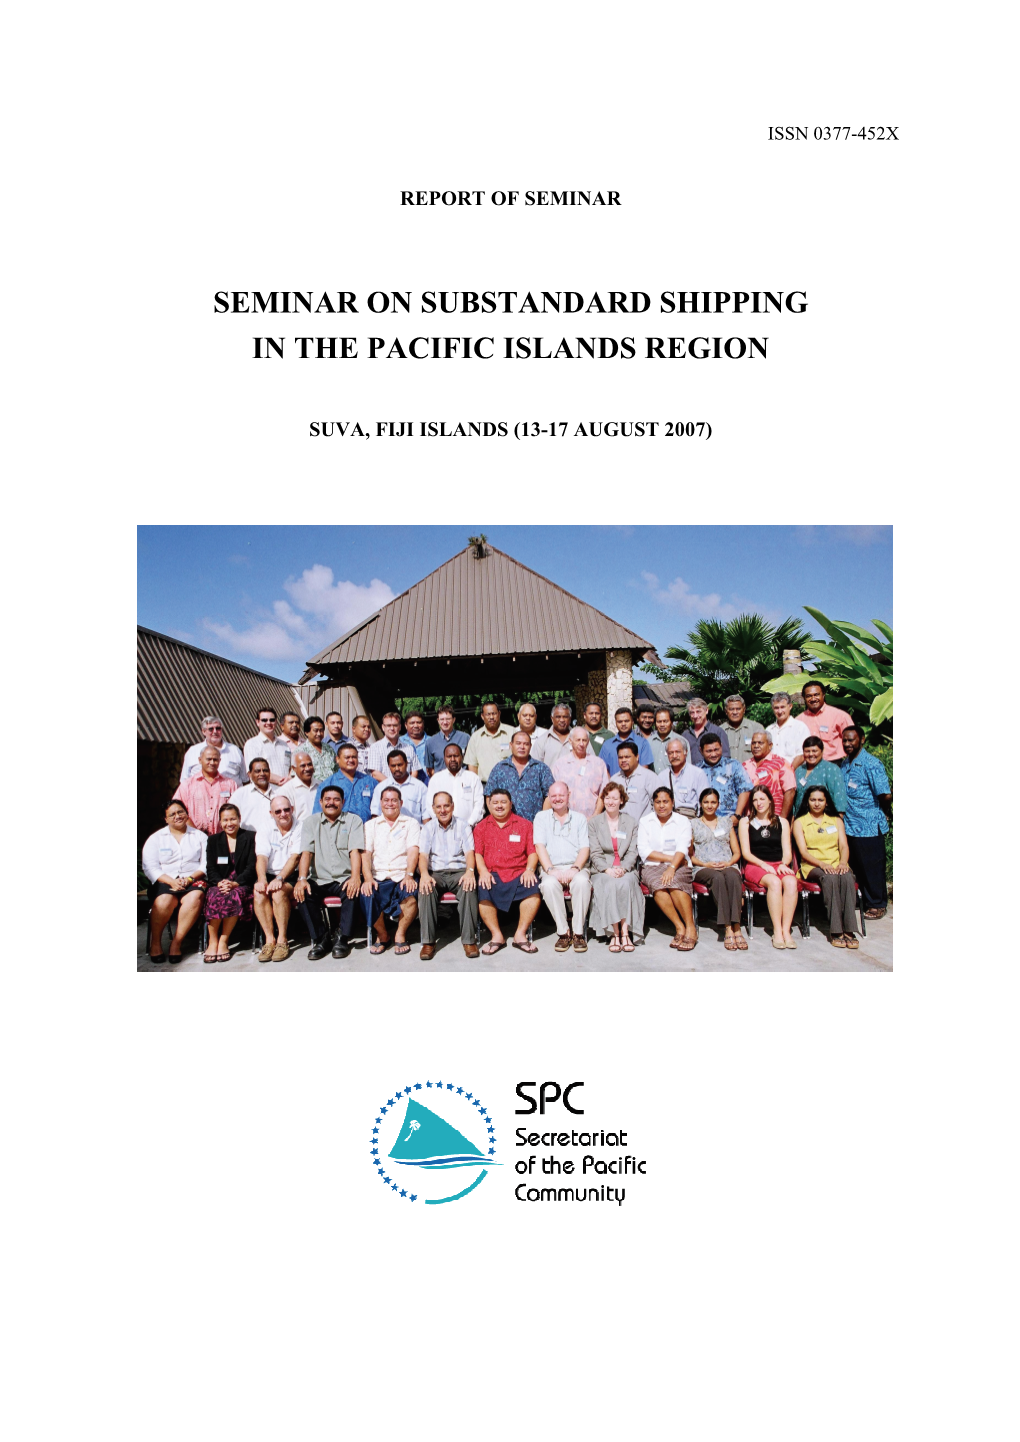 Seminar on Substandard Shipping in the Pacific Islands Region